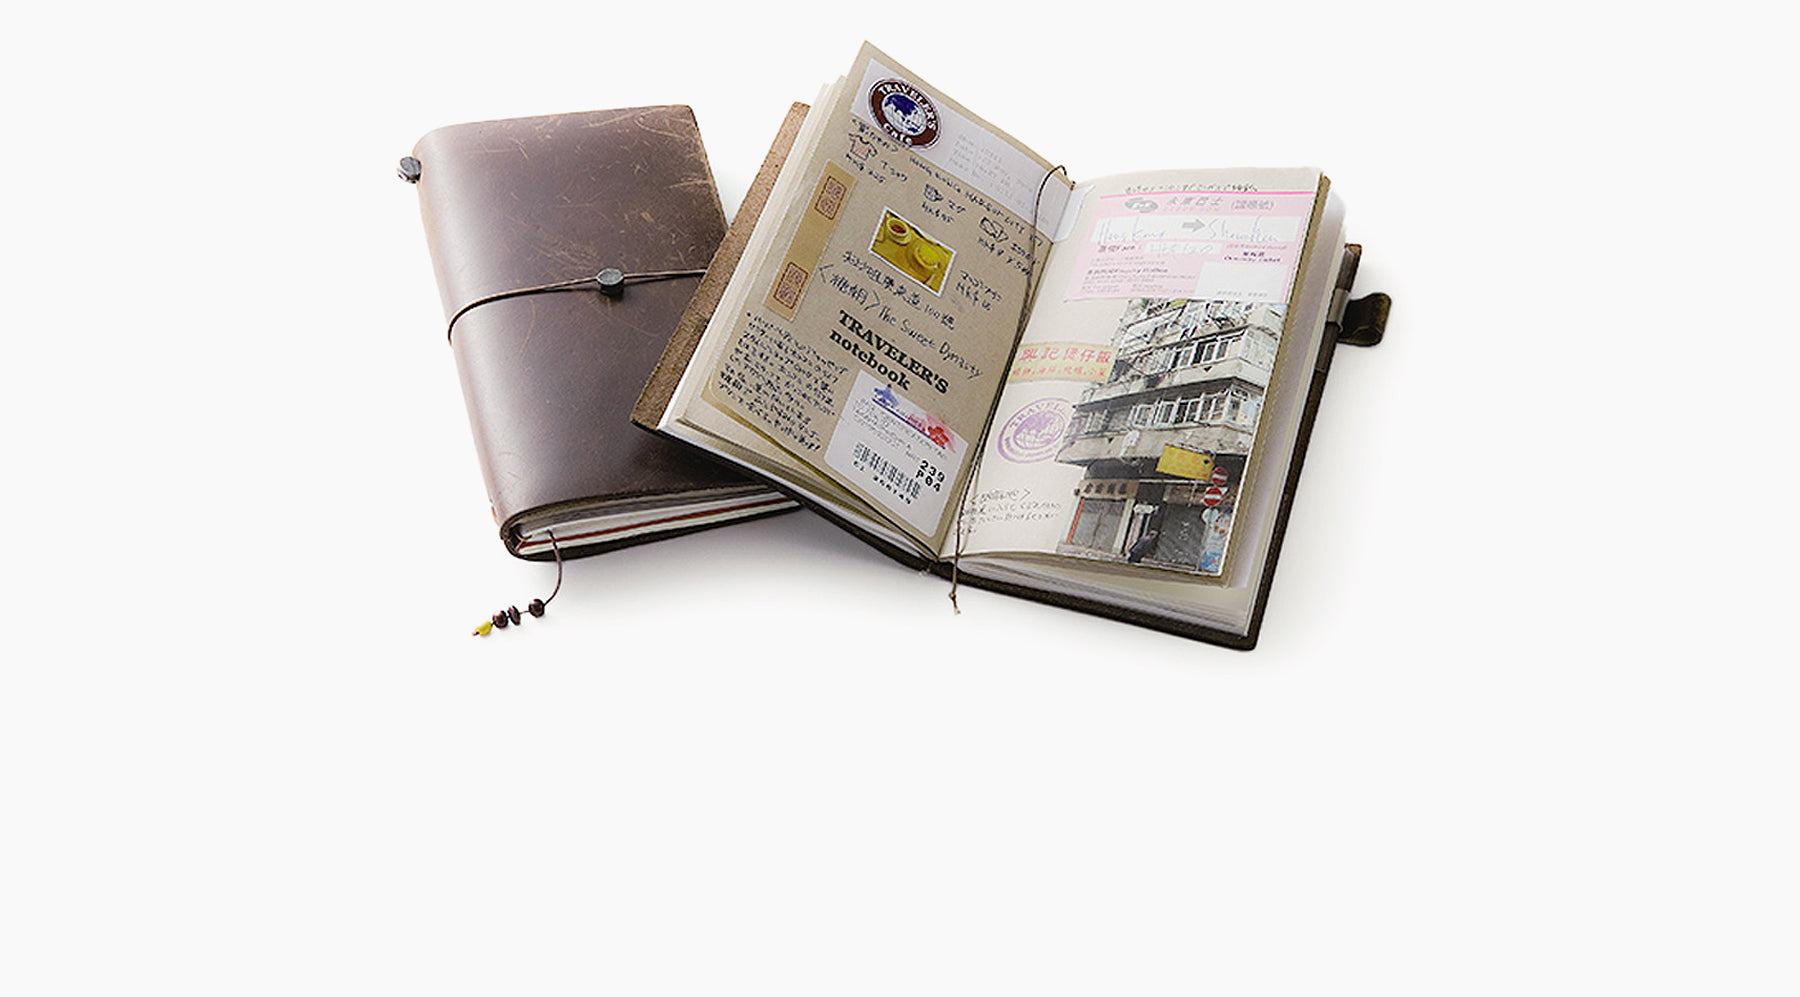 Aged and worn brown leather Travelers Co notebook from Japanese stationery brand Midori with notebook open showing details of a travel journal